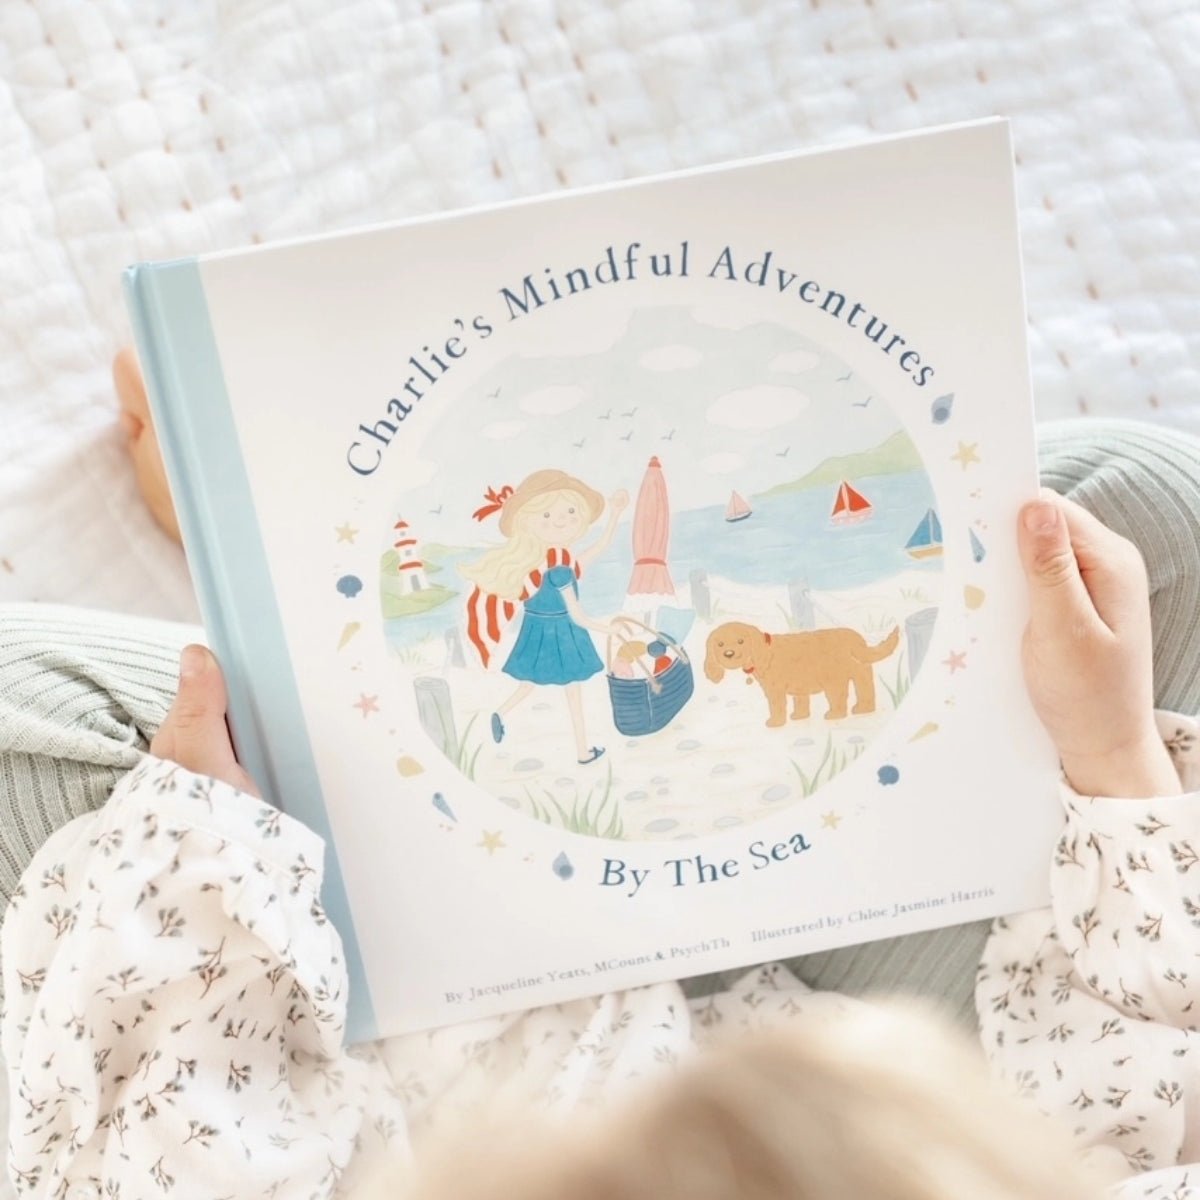 Charlie's Mindful Adventures by the Sea - Sensory Journey Kids Book